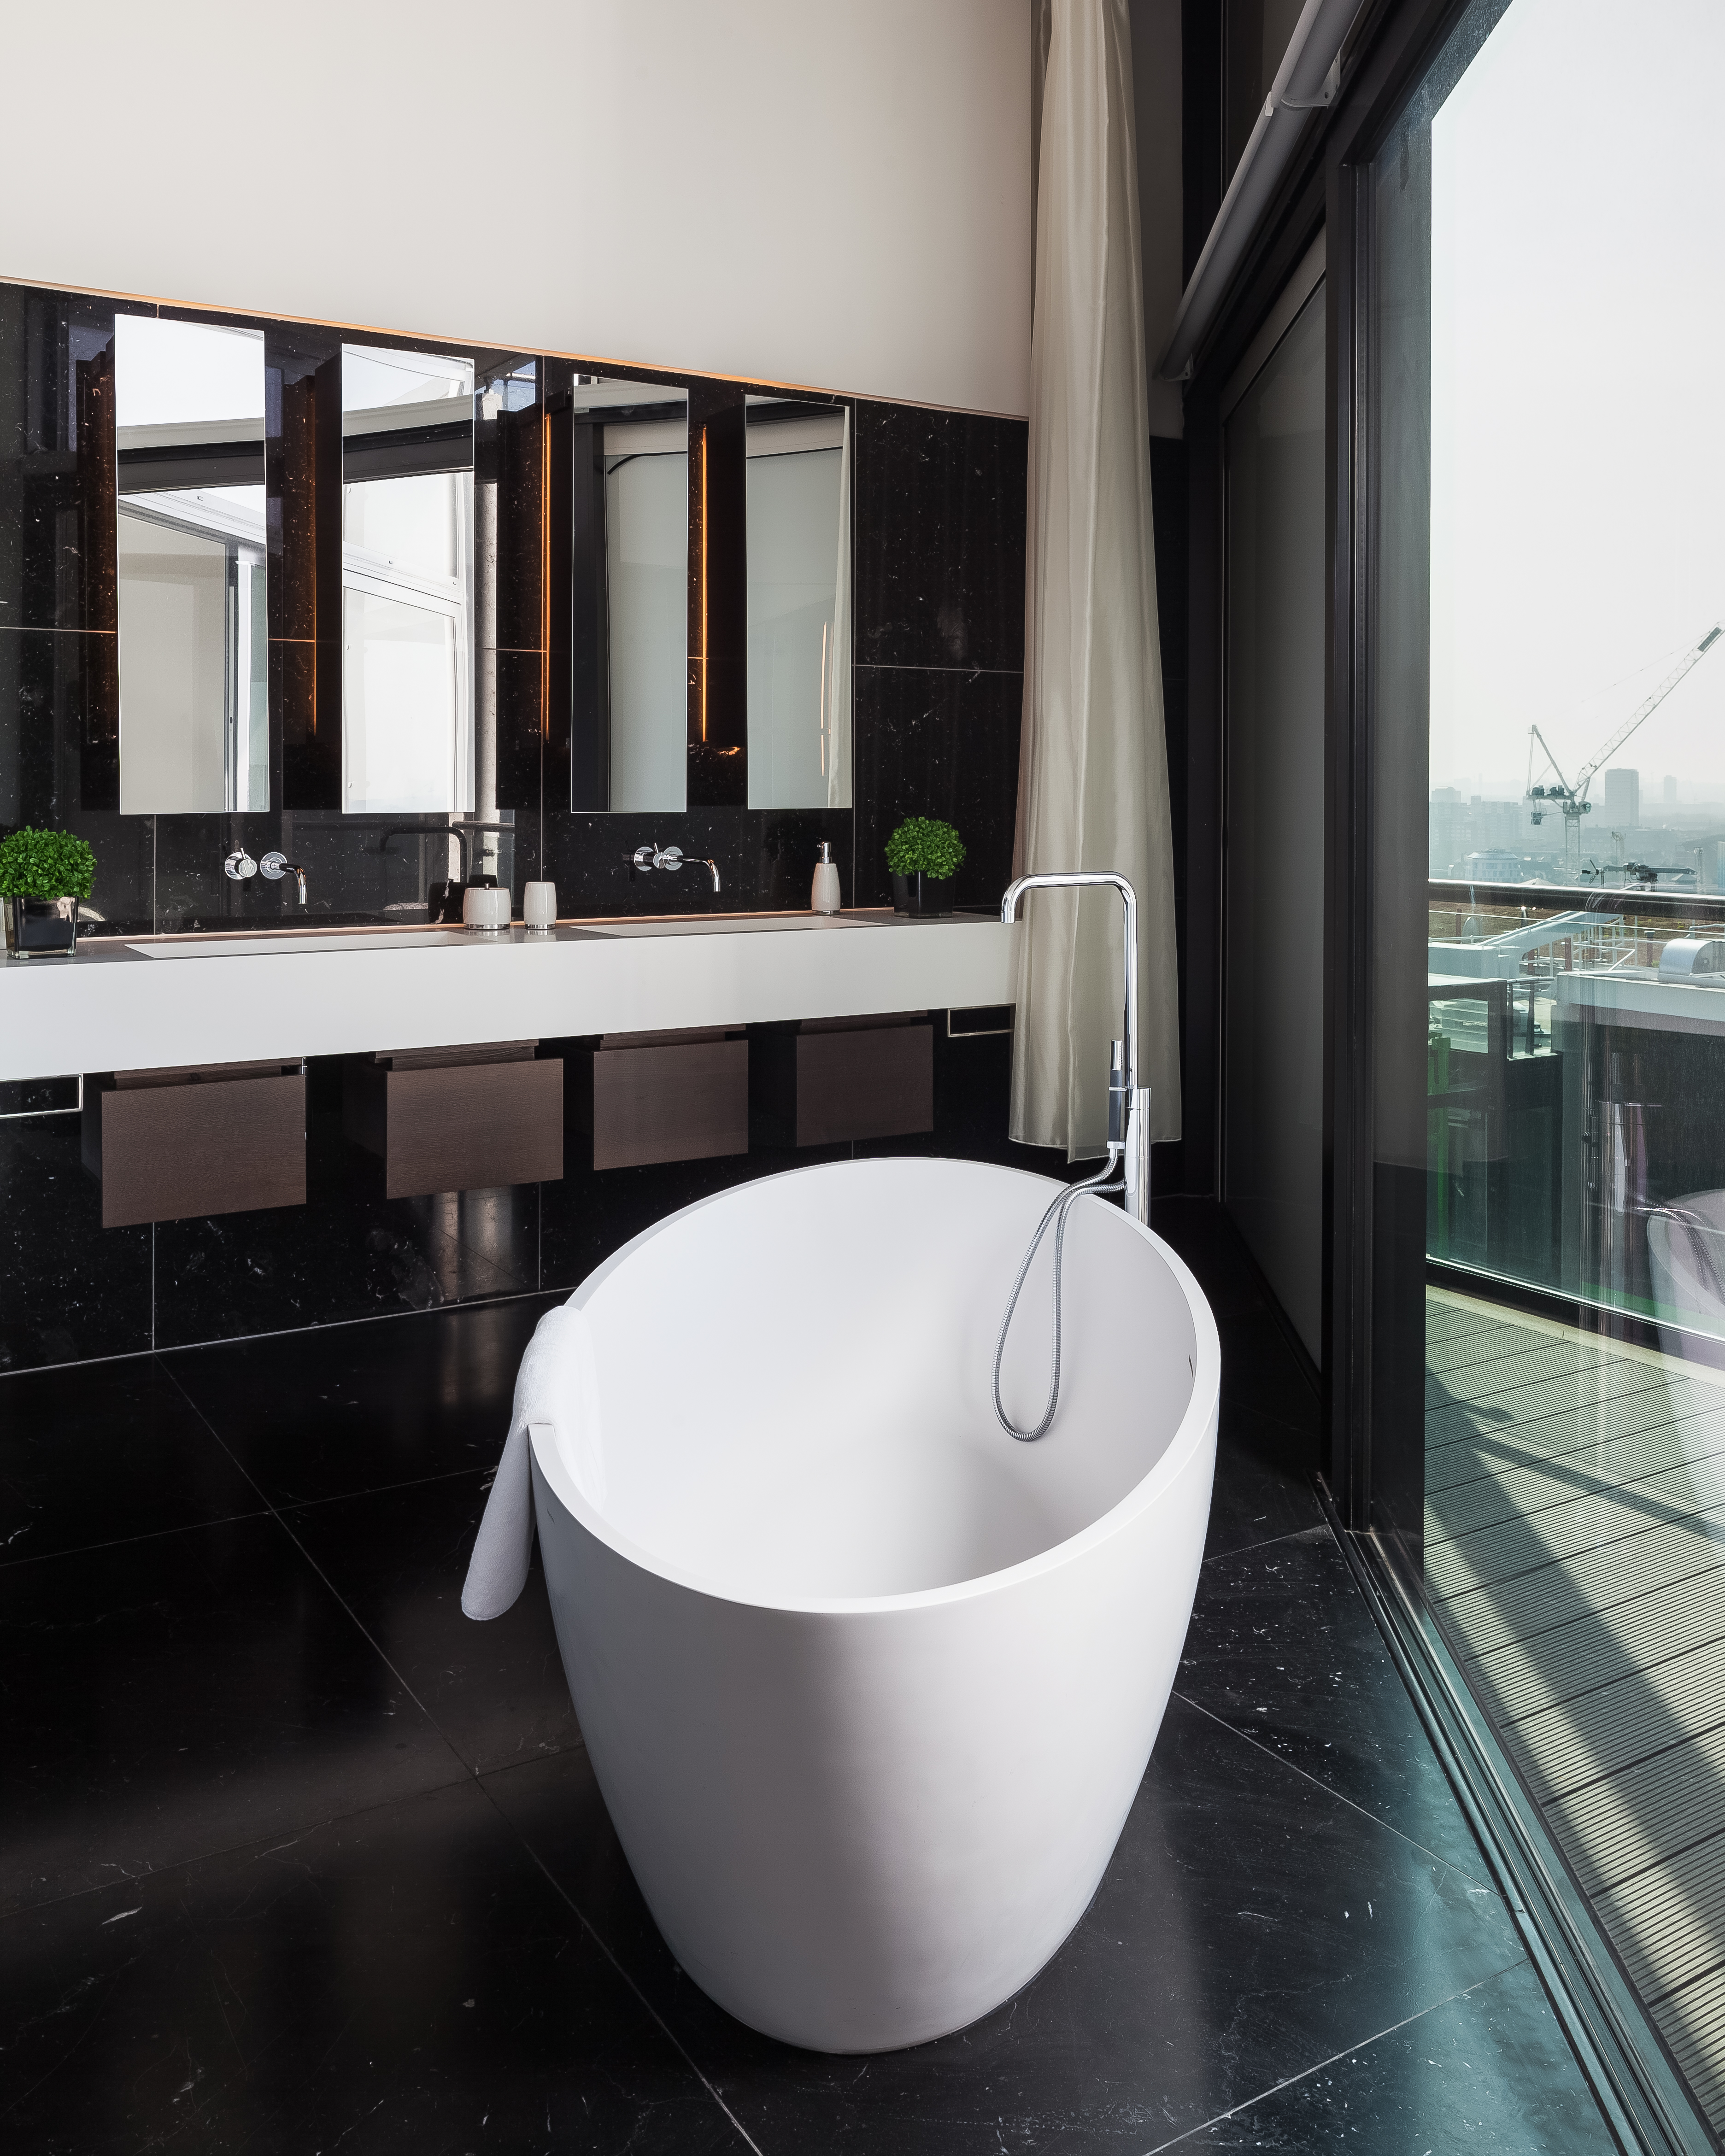 bathtub with a view over London